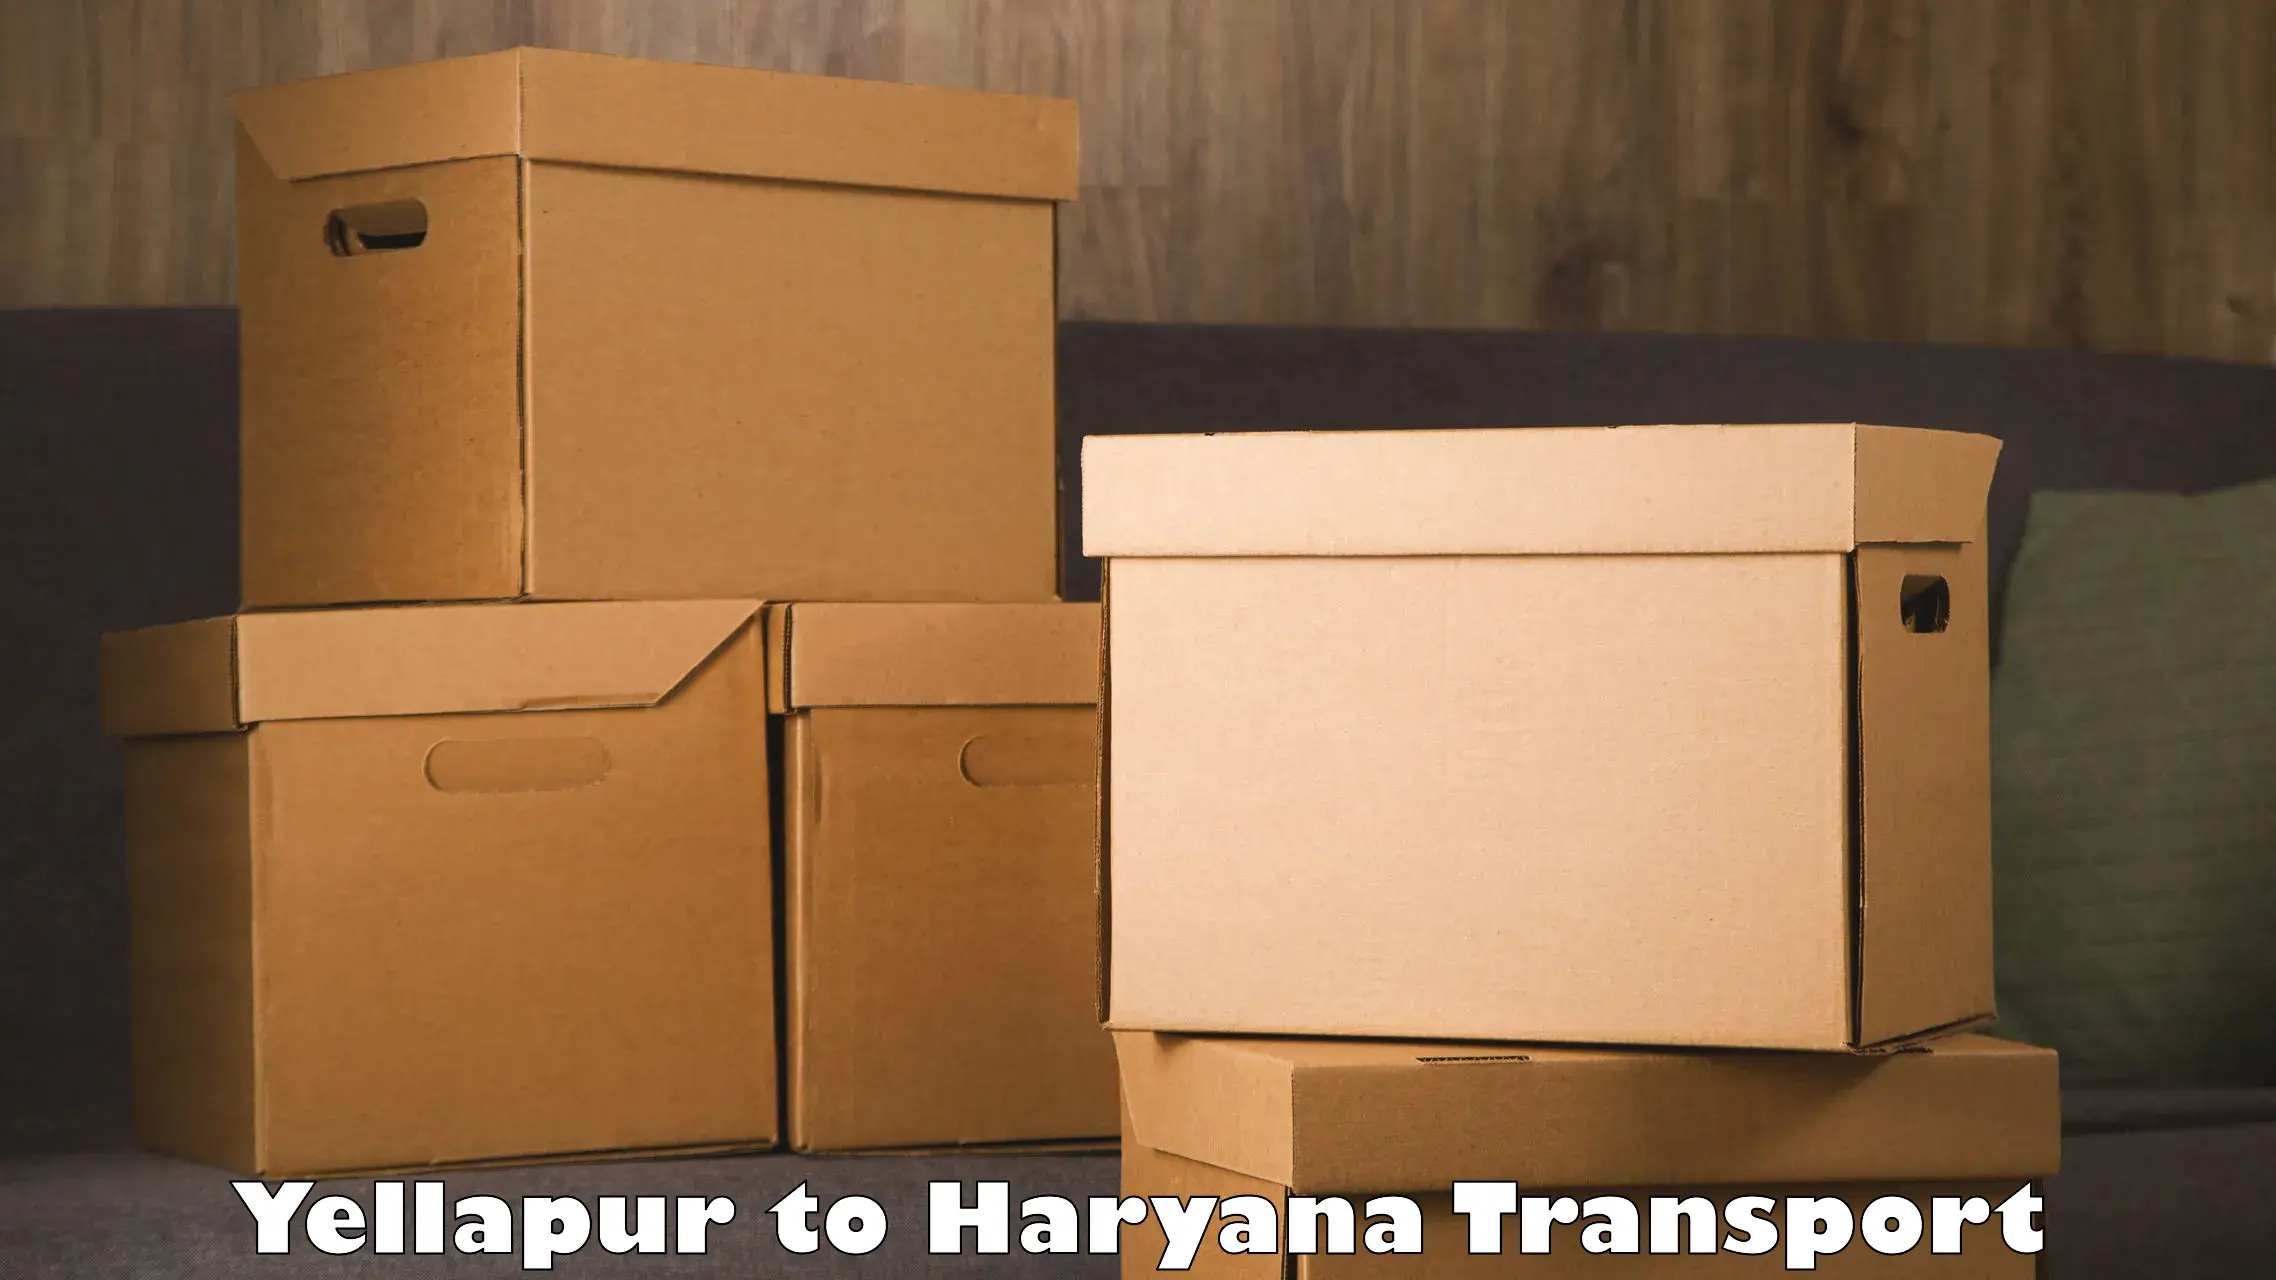 Best transport services in India in Yellapur to Faridabad